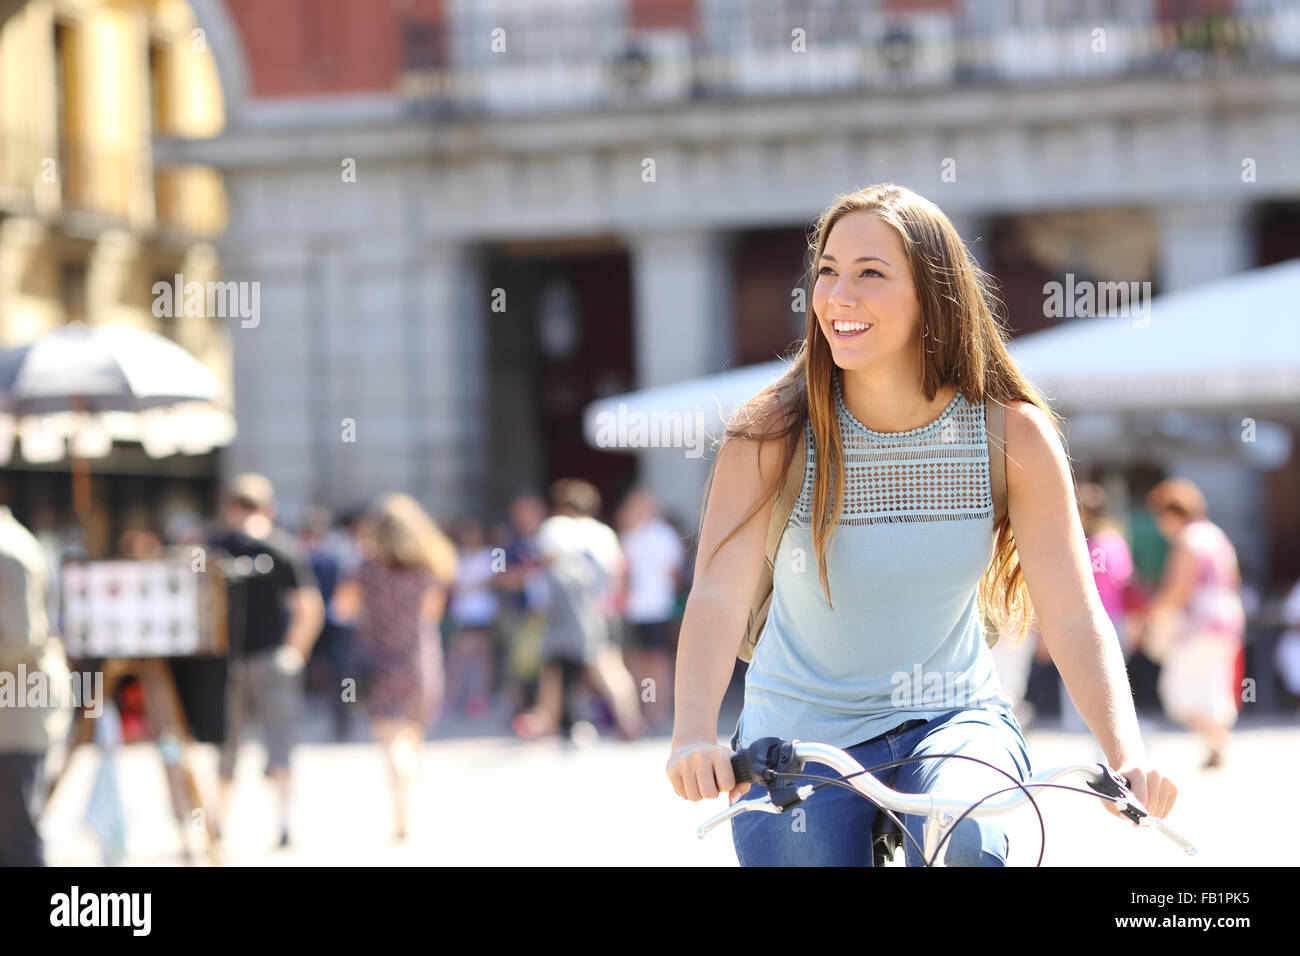 Candid tourist cyclist sightseeing in a old town of a city Stock Photo